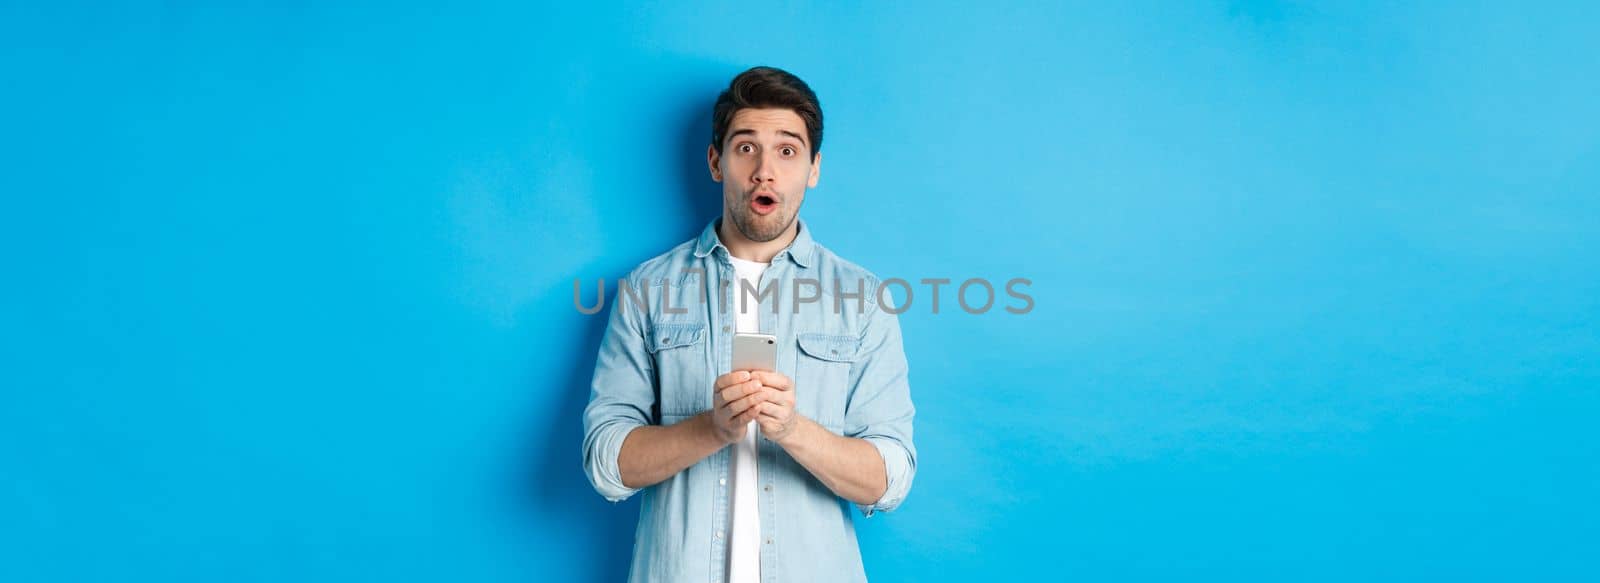 Surprised man in casual clothes looking astounded, holding smartphone, standing against blue background.